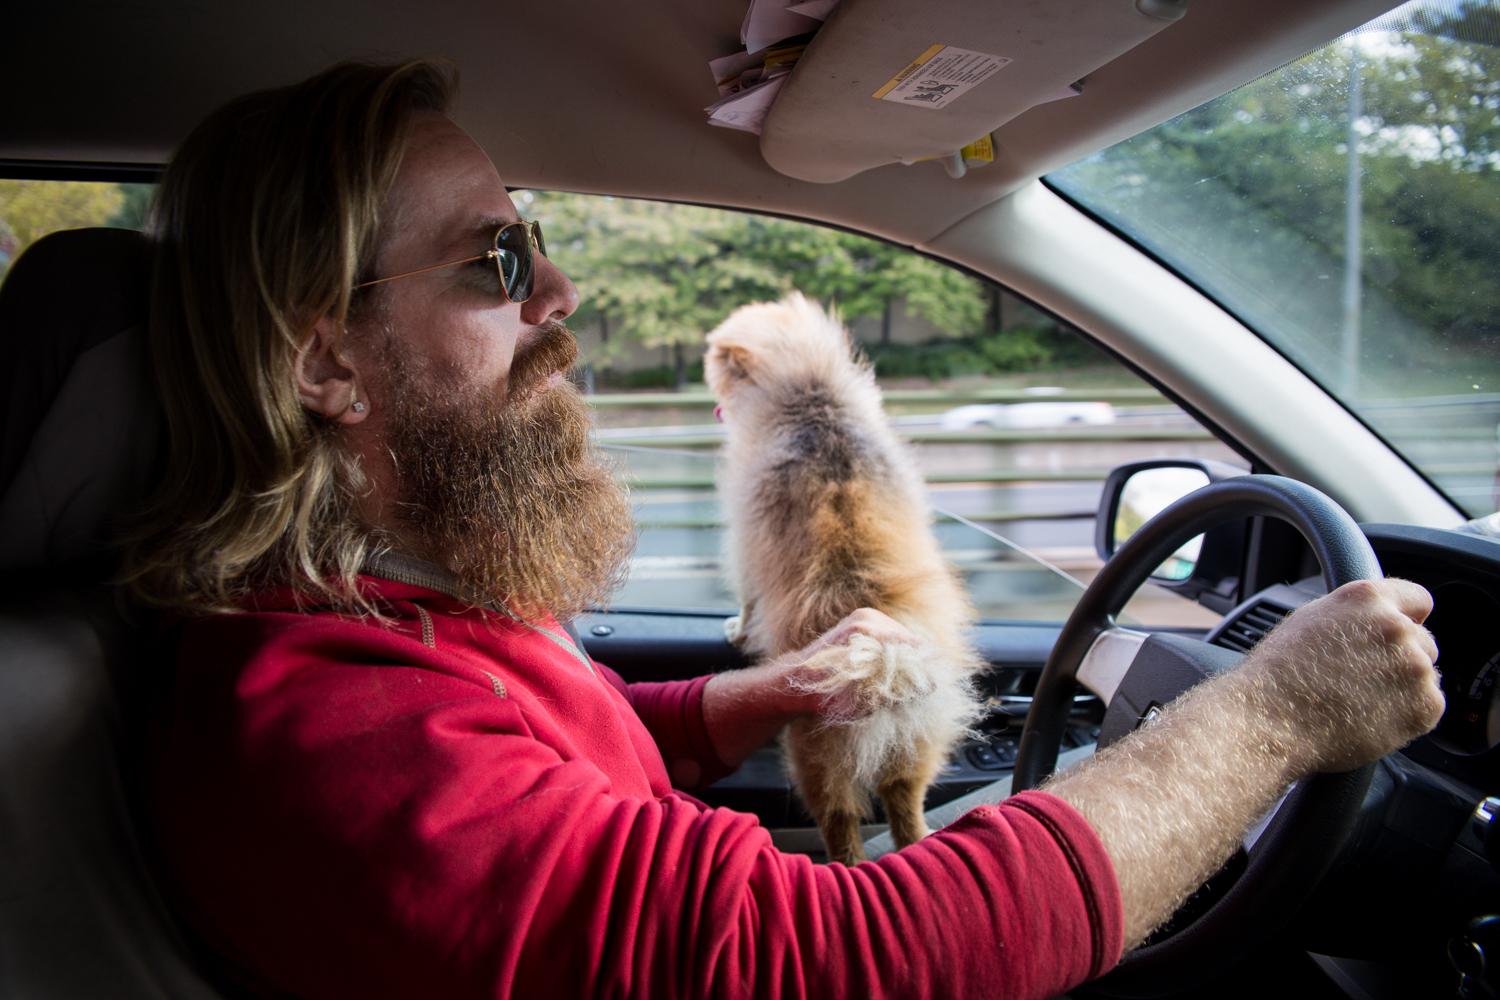  I think it's worth pointing out here that he's holding the dog's tail to make sure it doesn't jump out the window. The dog never made an effort to jump out the window. &nbsp;He's doing it just in case. &nbsp;That's called professionalism. 